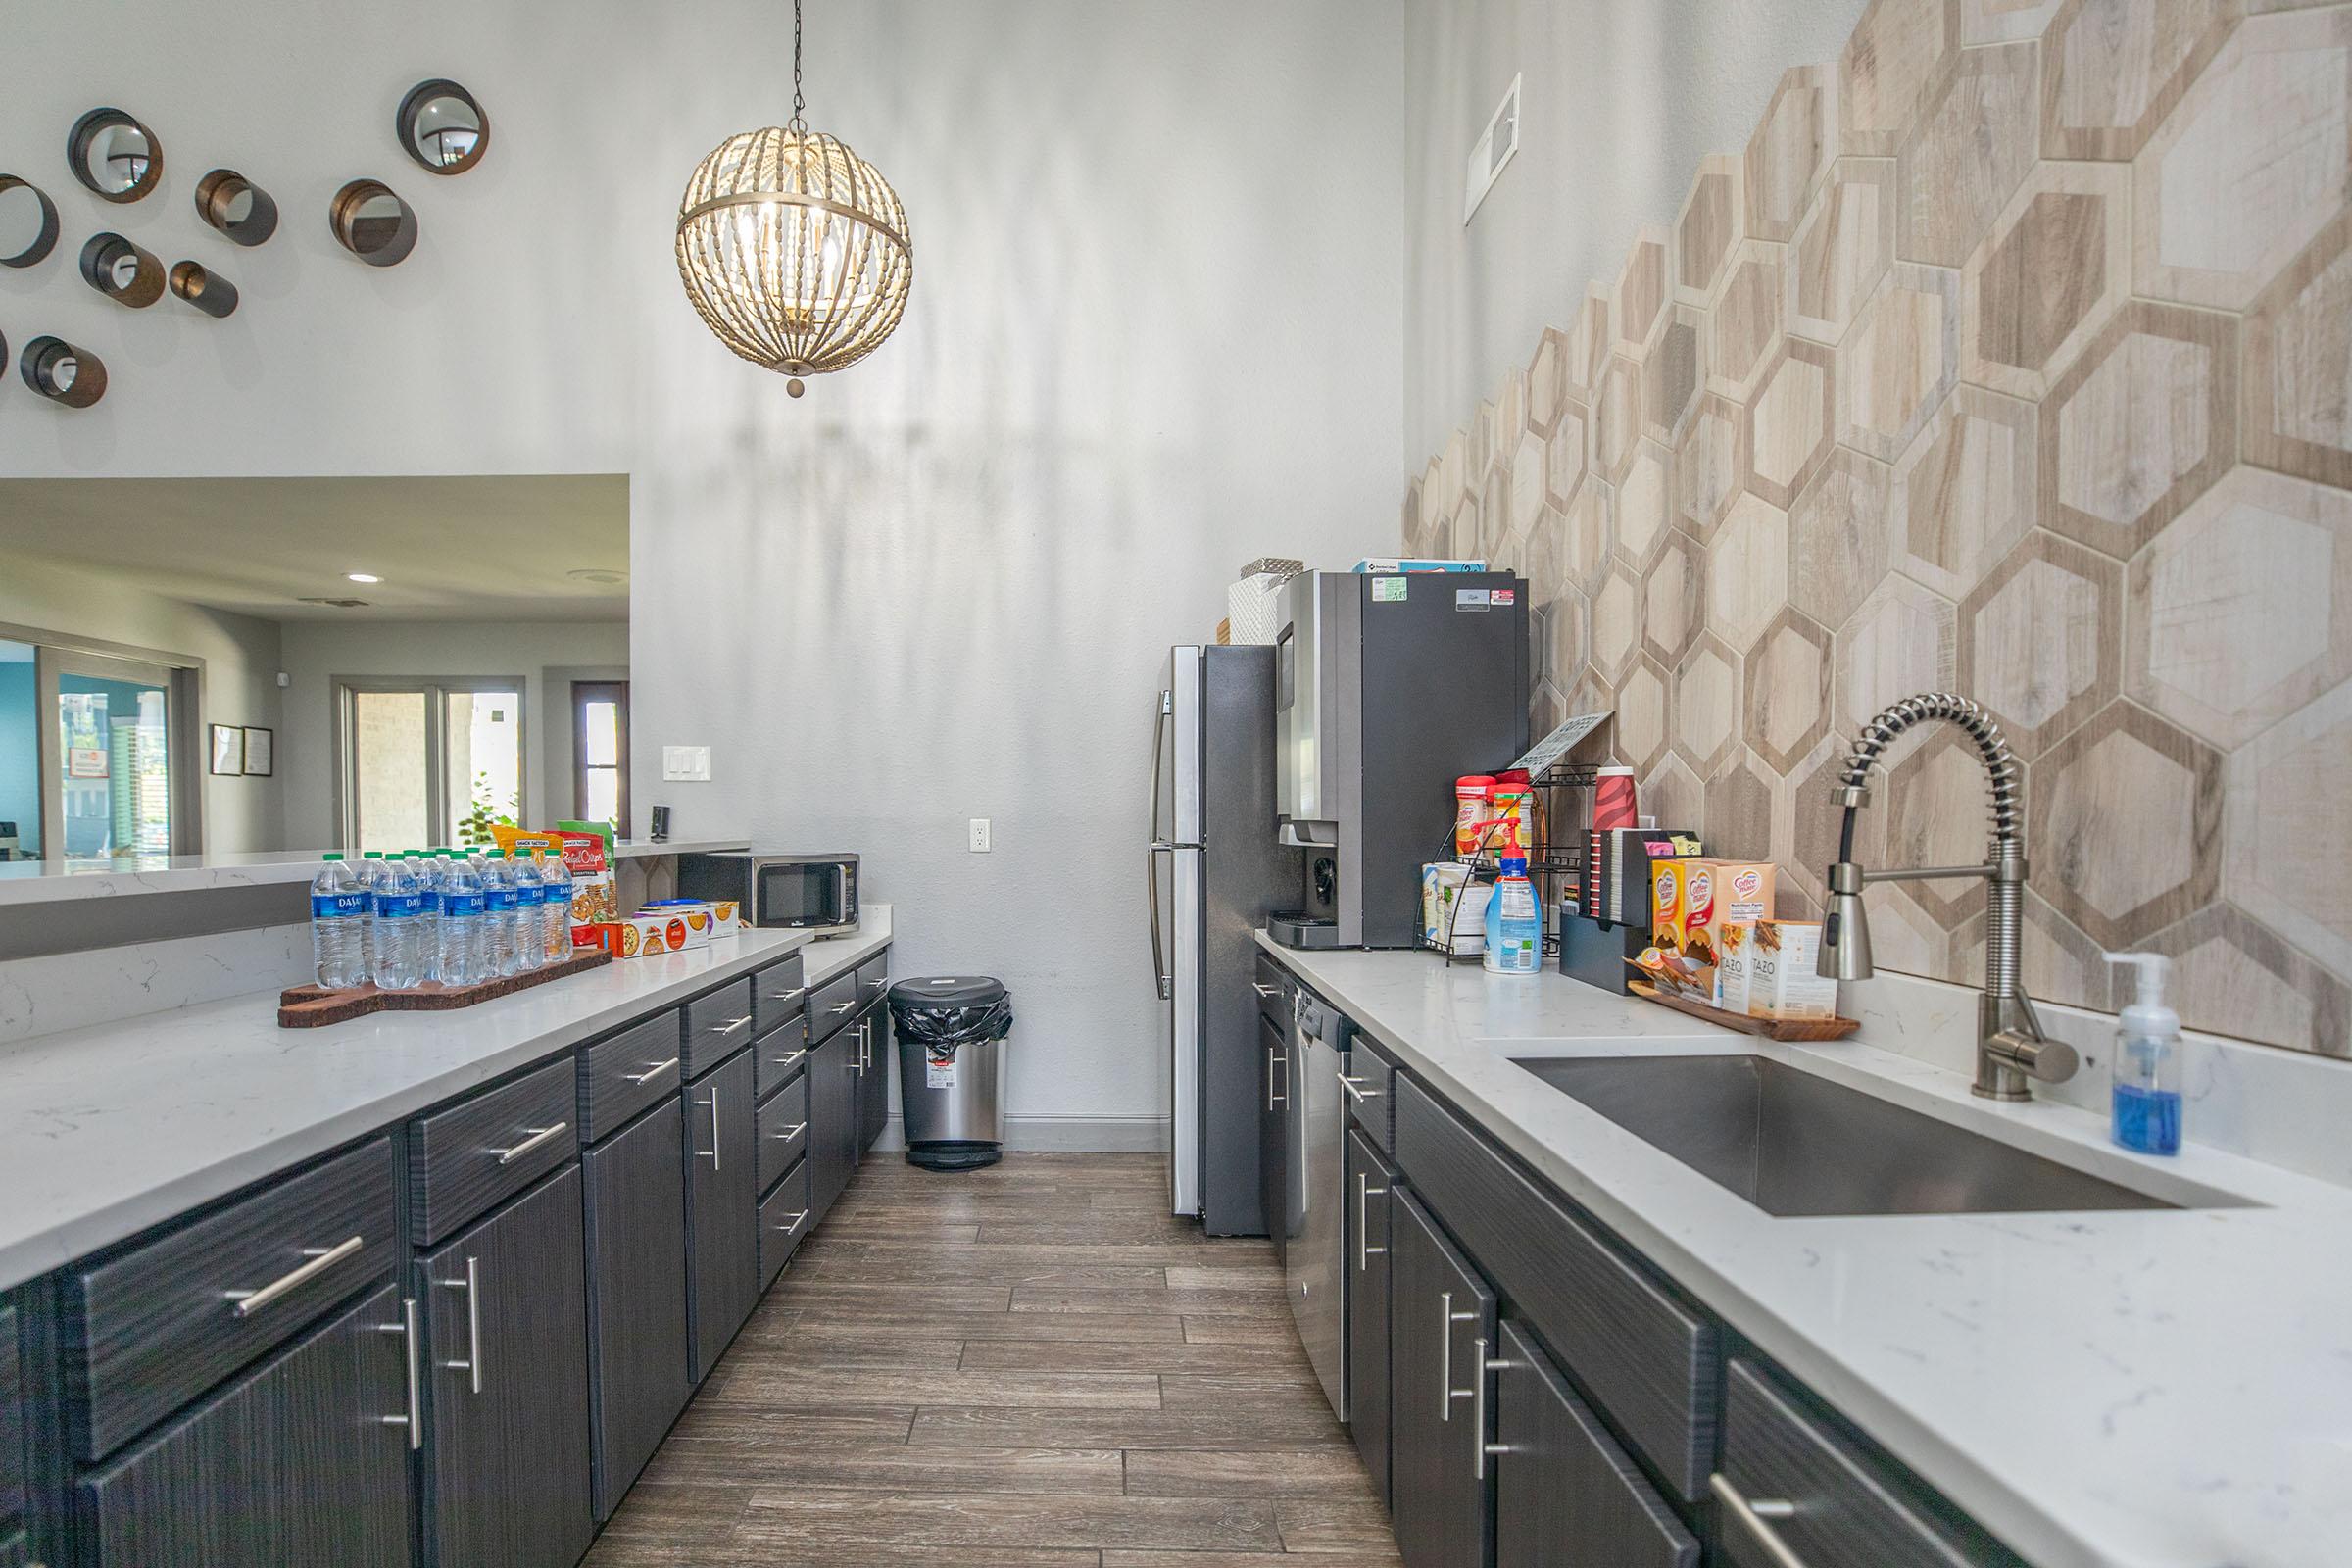 The expansive clubhouses kitchen with a bar counter and stainless steel appliances at Rise North Arlington.